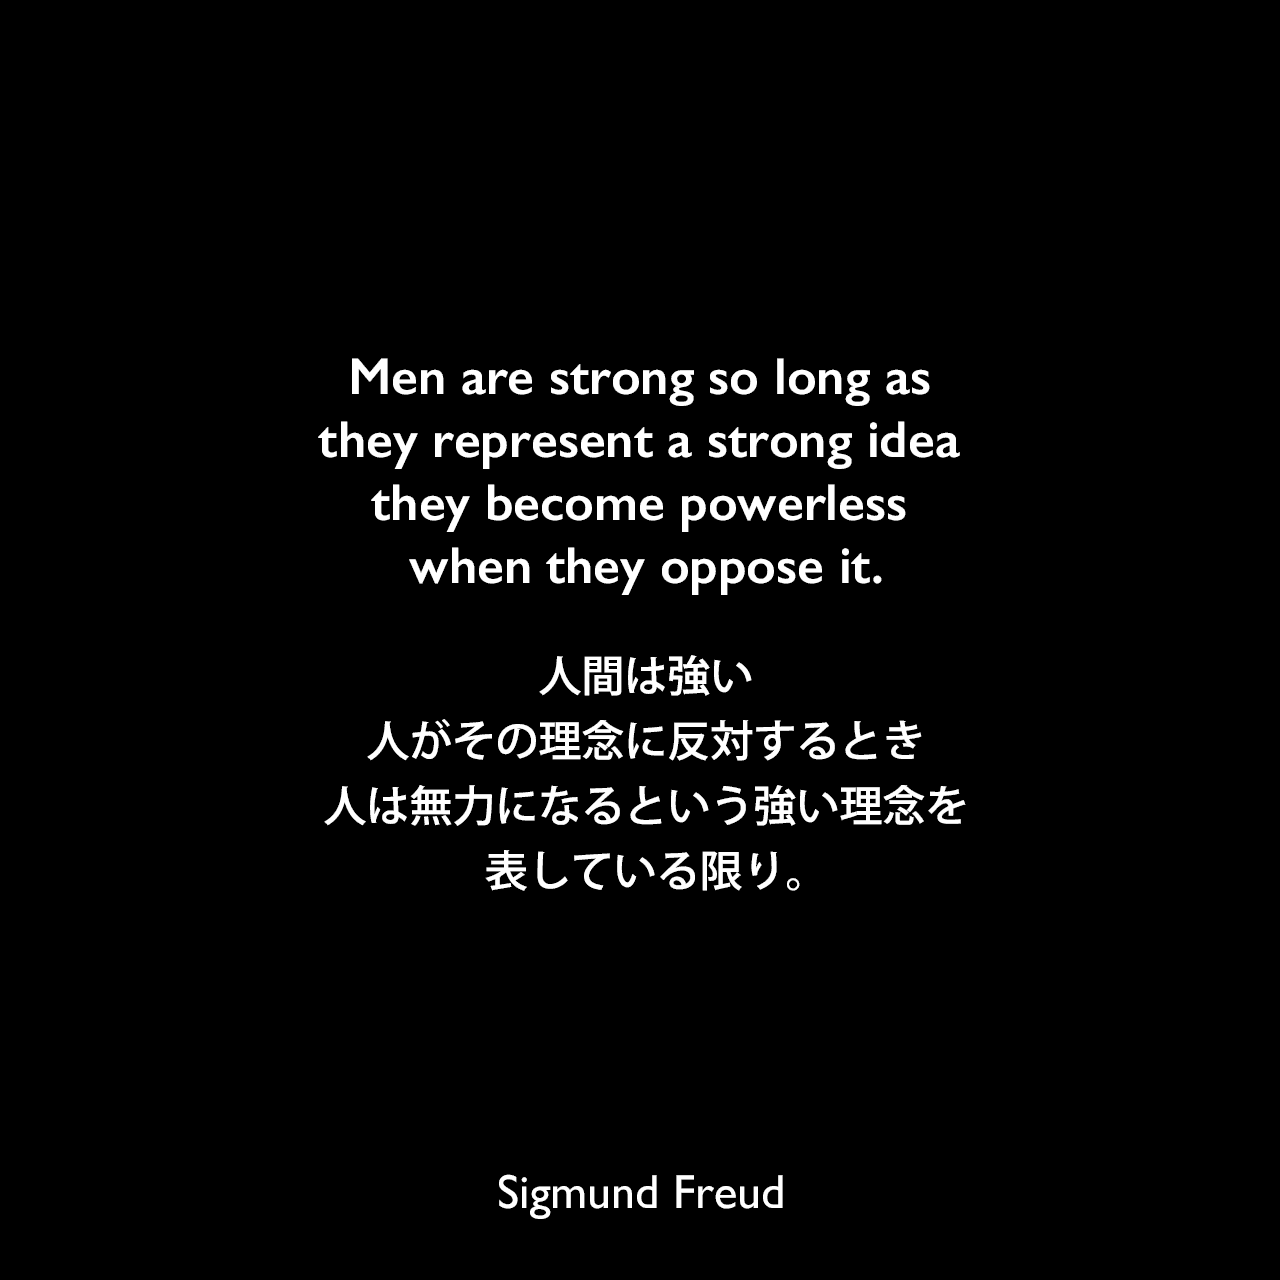 Men are strong so long as they represent a strong idea they become powerless when they oppose it.人間は強い、人がその理念に反対するとき、人は無力になるという強い理念を表している限り。Sigmund Freud